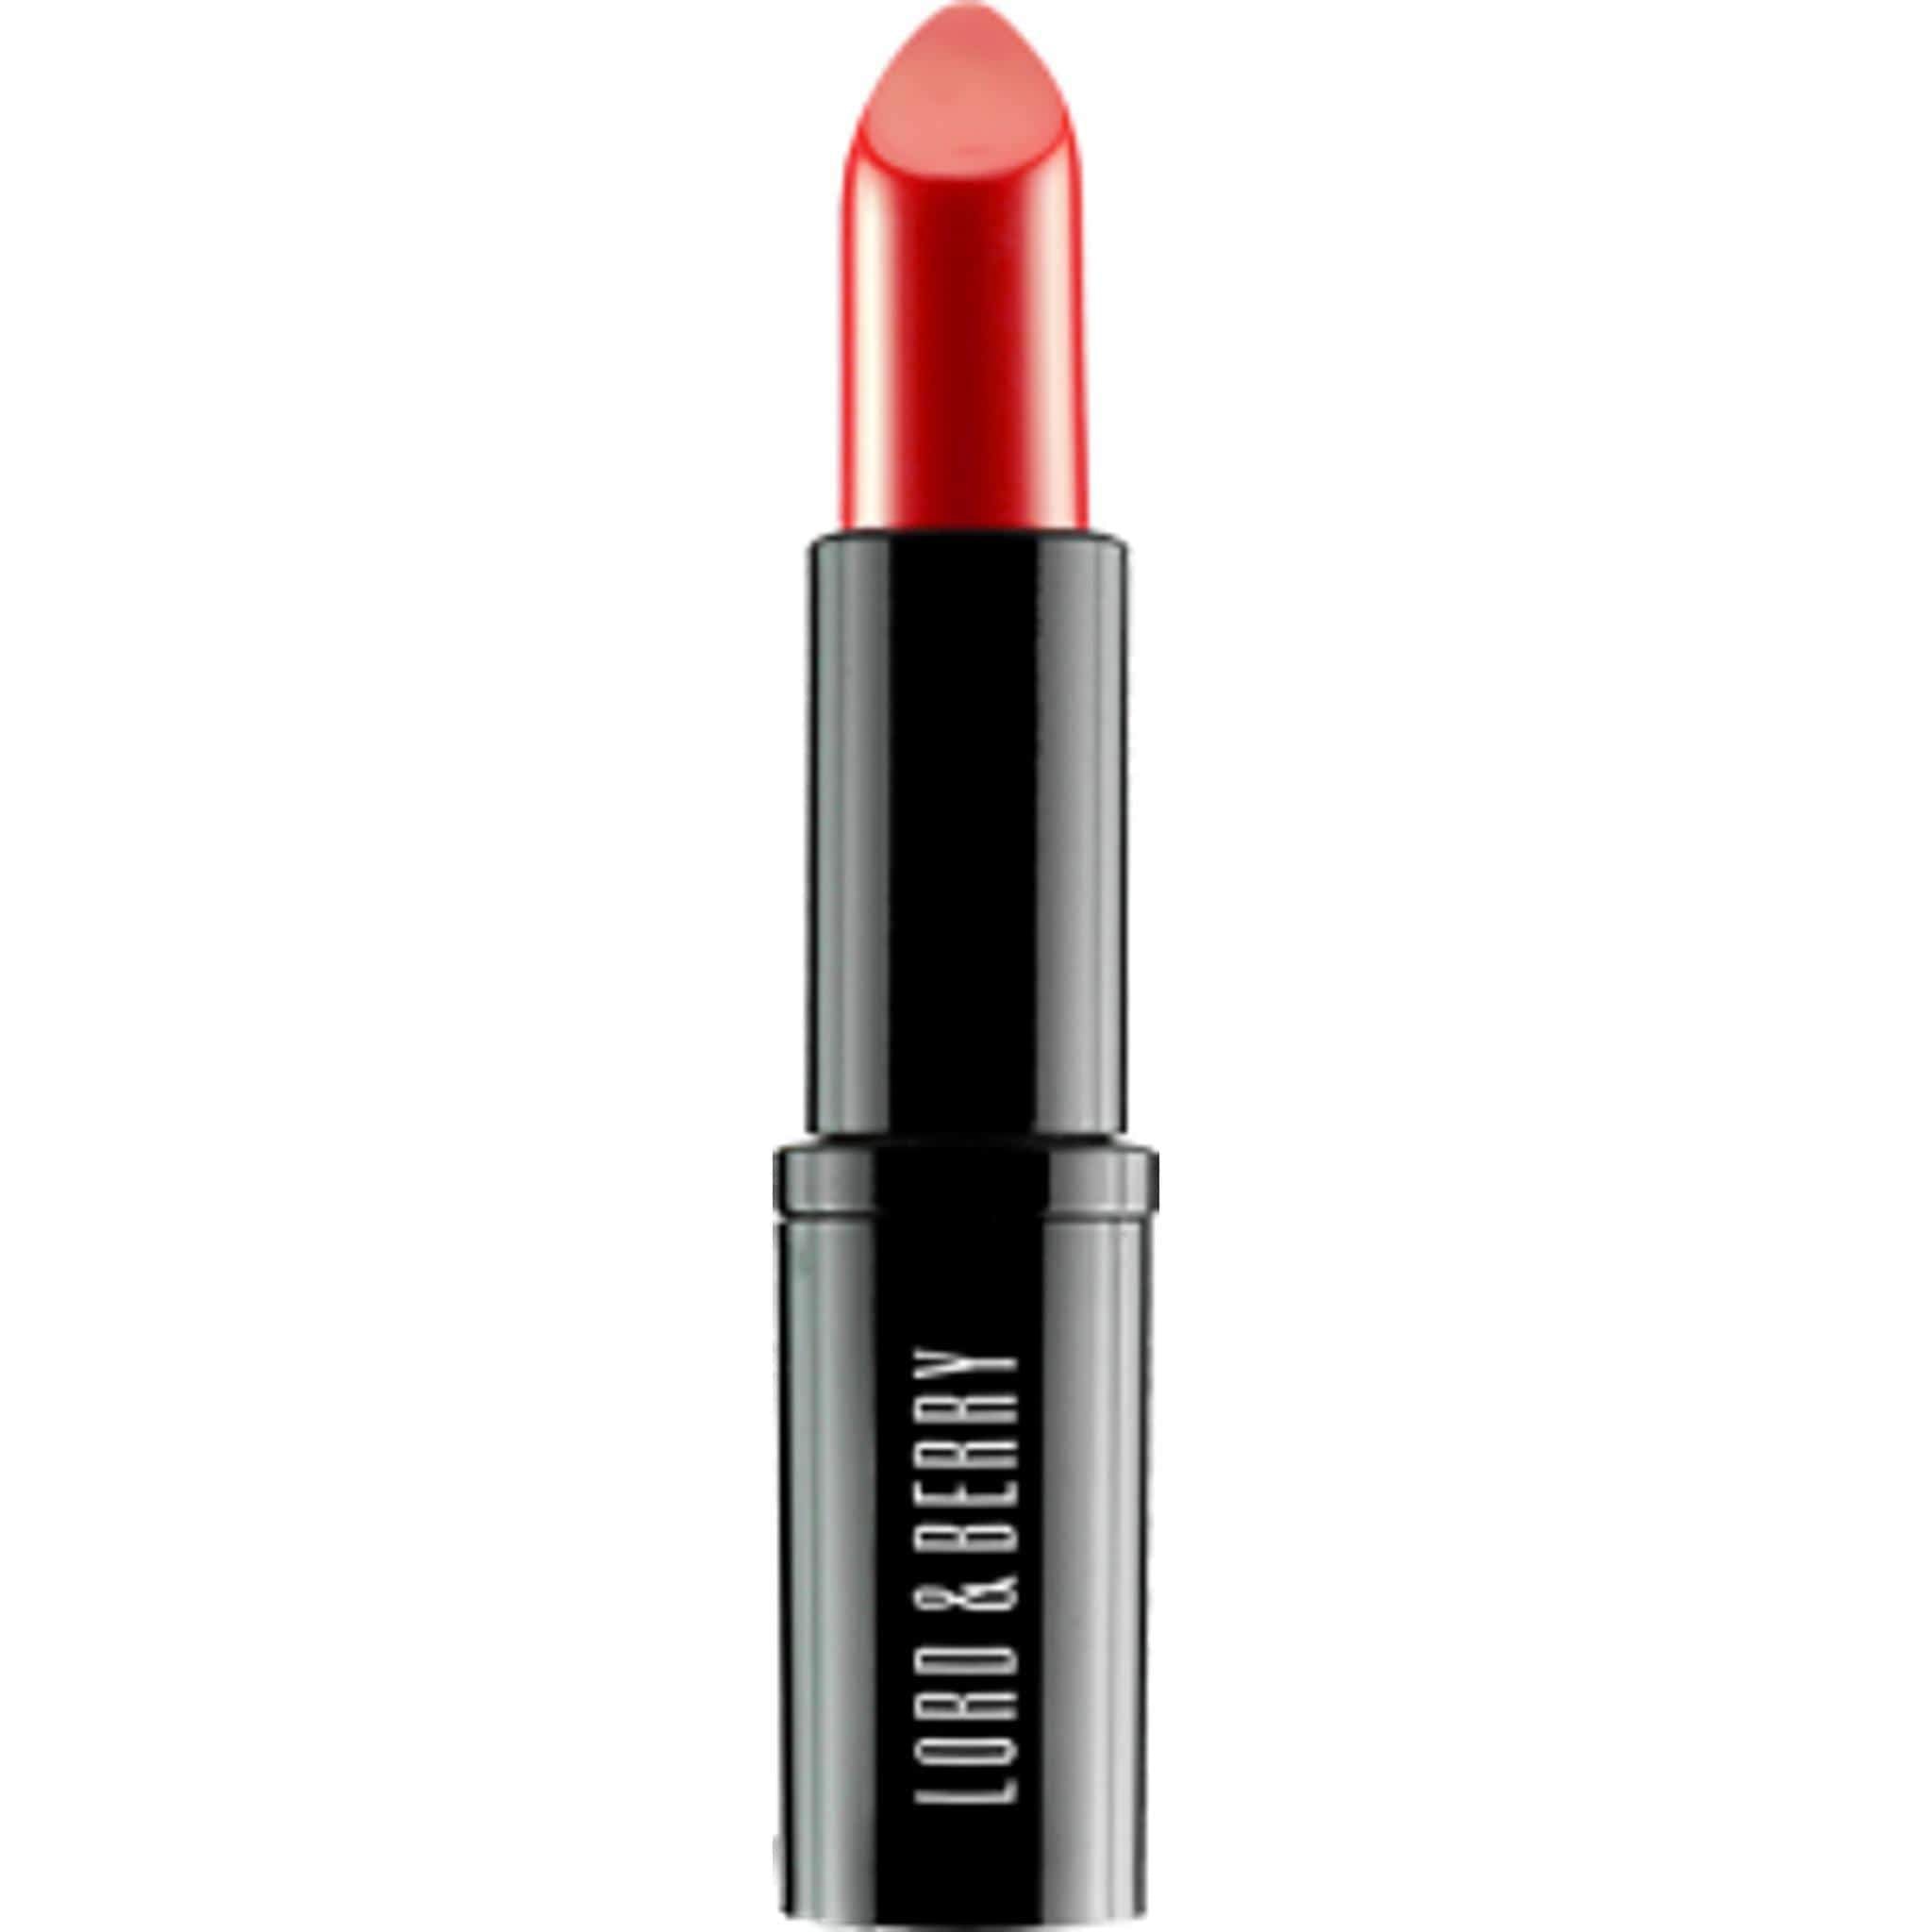 LORD & BERRY  Vogue -  Red #7601, lipstick, London Loves Beauty